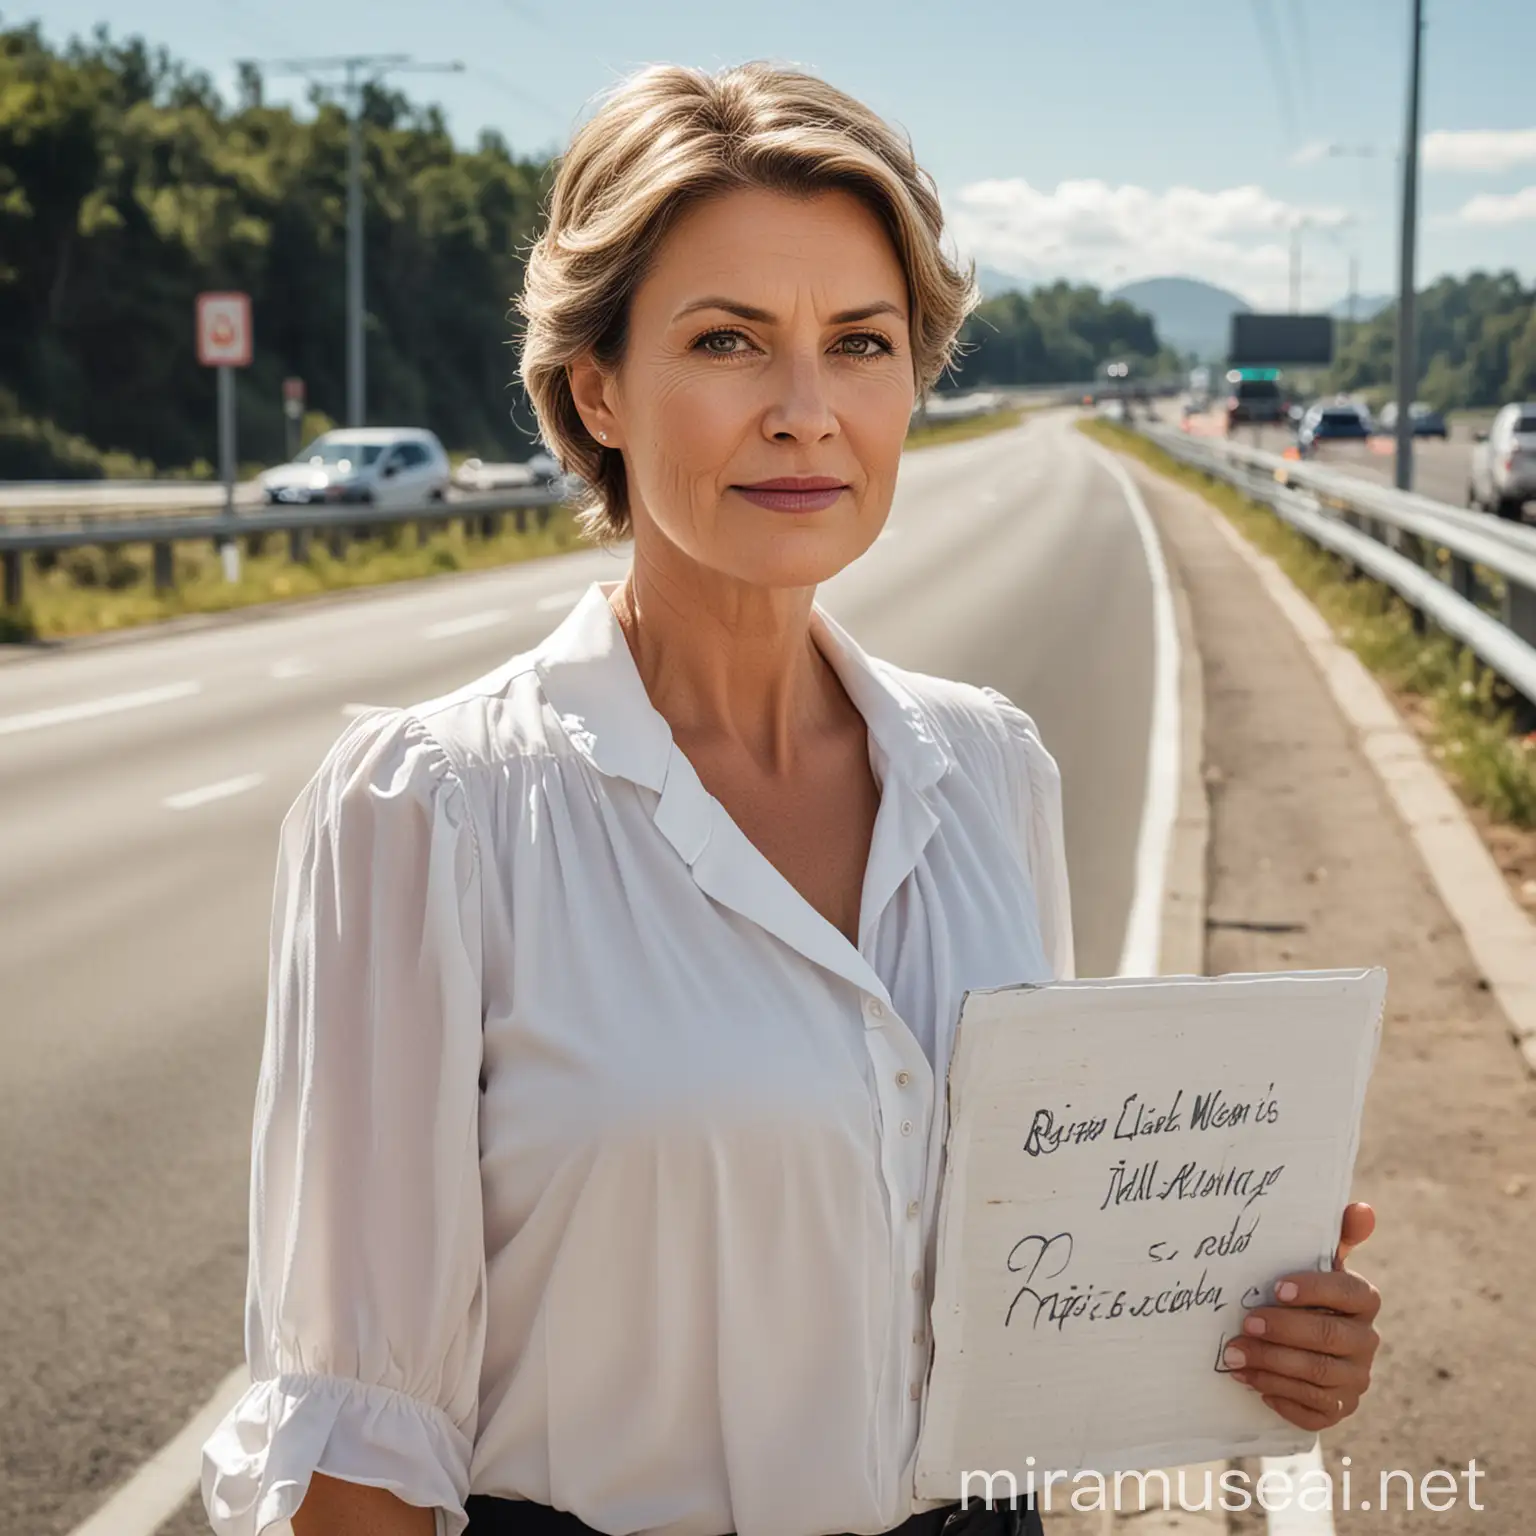 A elegantly dressed natural looking middle-aged woman with a large bust, wearing a white blouse with a neckline, standing by the highway, holding a white sign